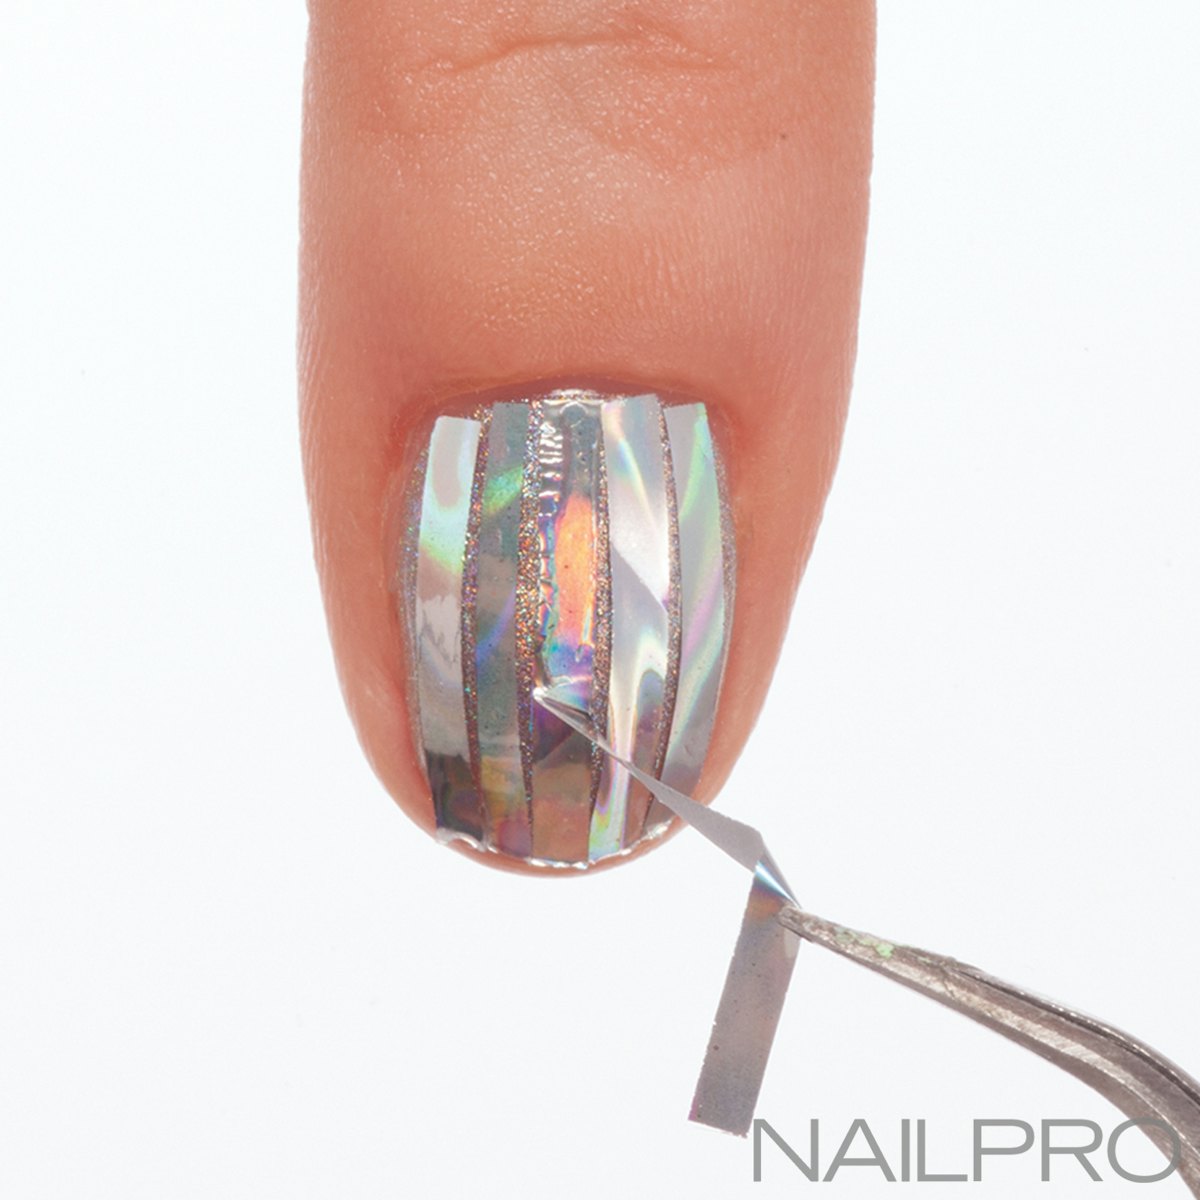 Two Techniques to Have Fun With Foils | Nailpro